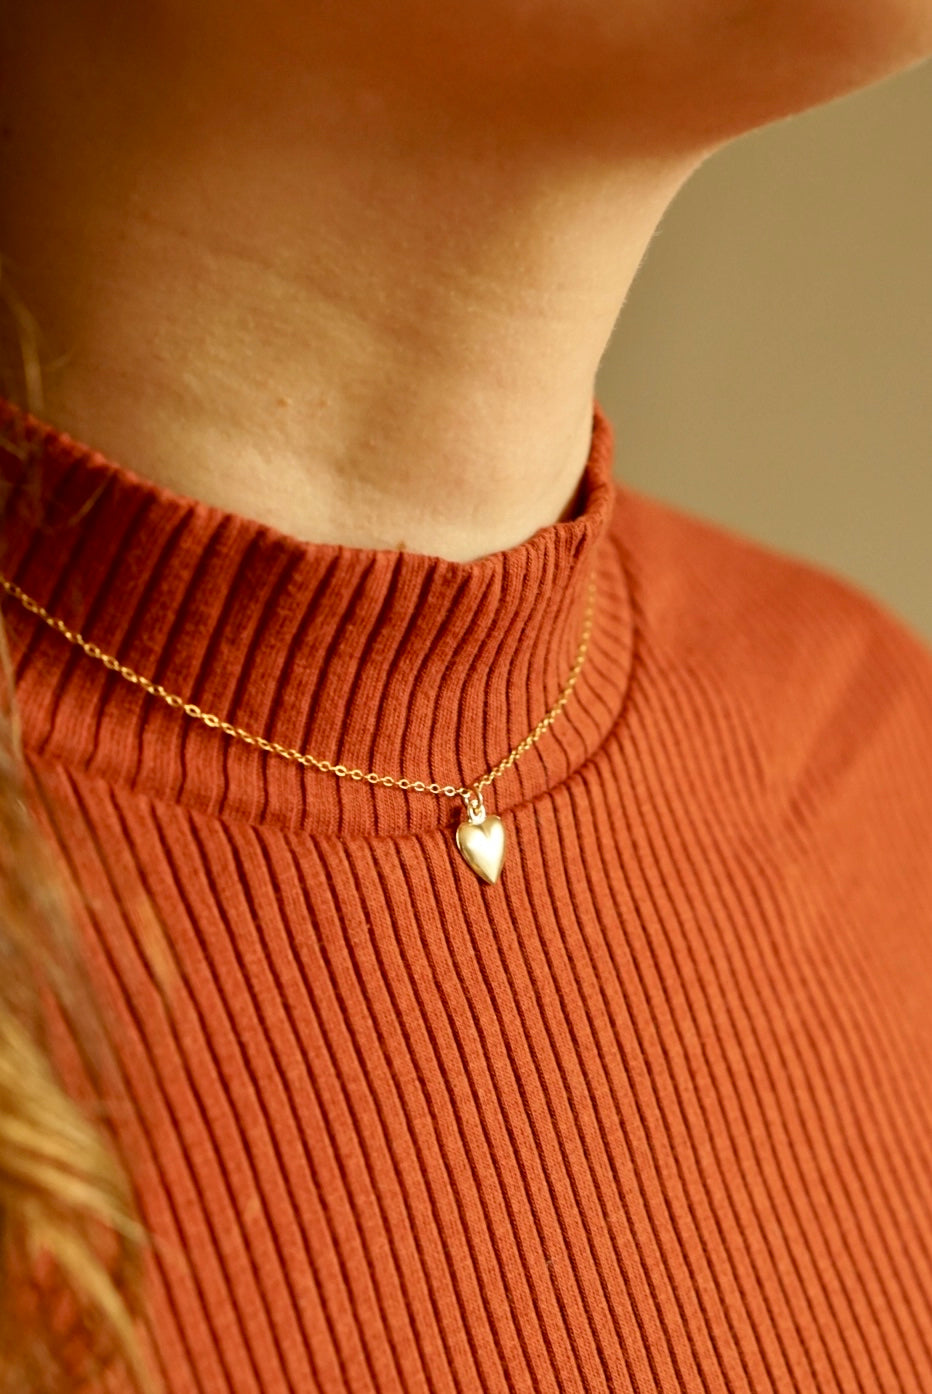 Fine necklace with pendant - golden heart (Winter edition)